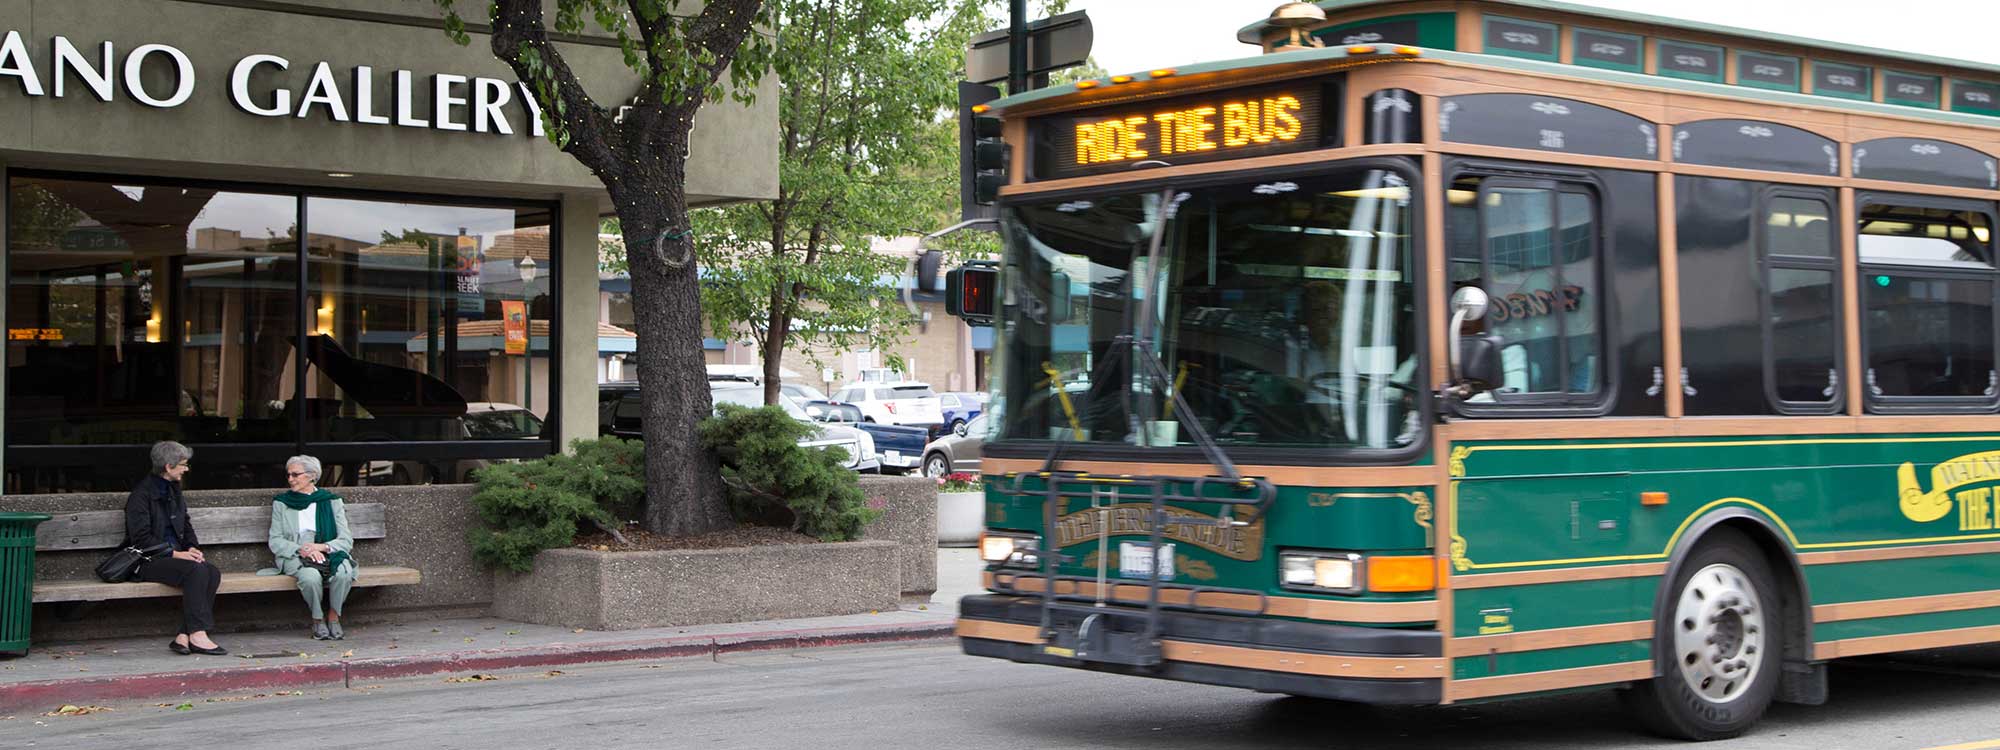 Proposition 6 will take funding away from public transportation like this bus in Walnut Creek